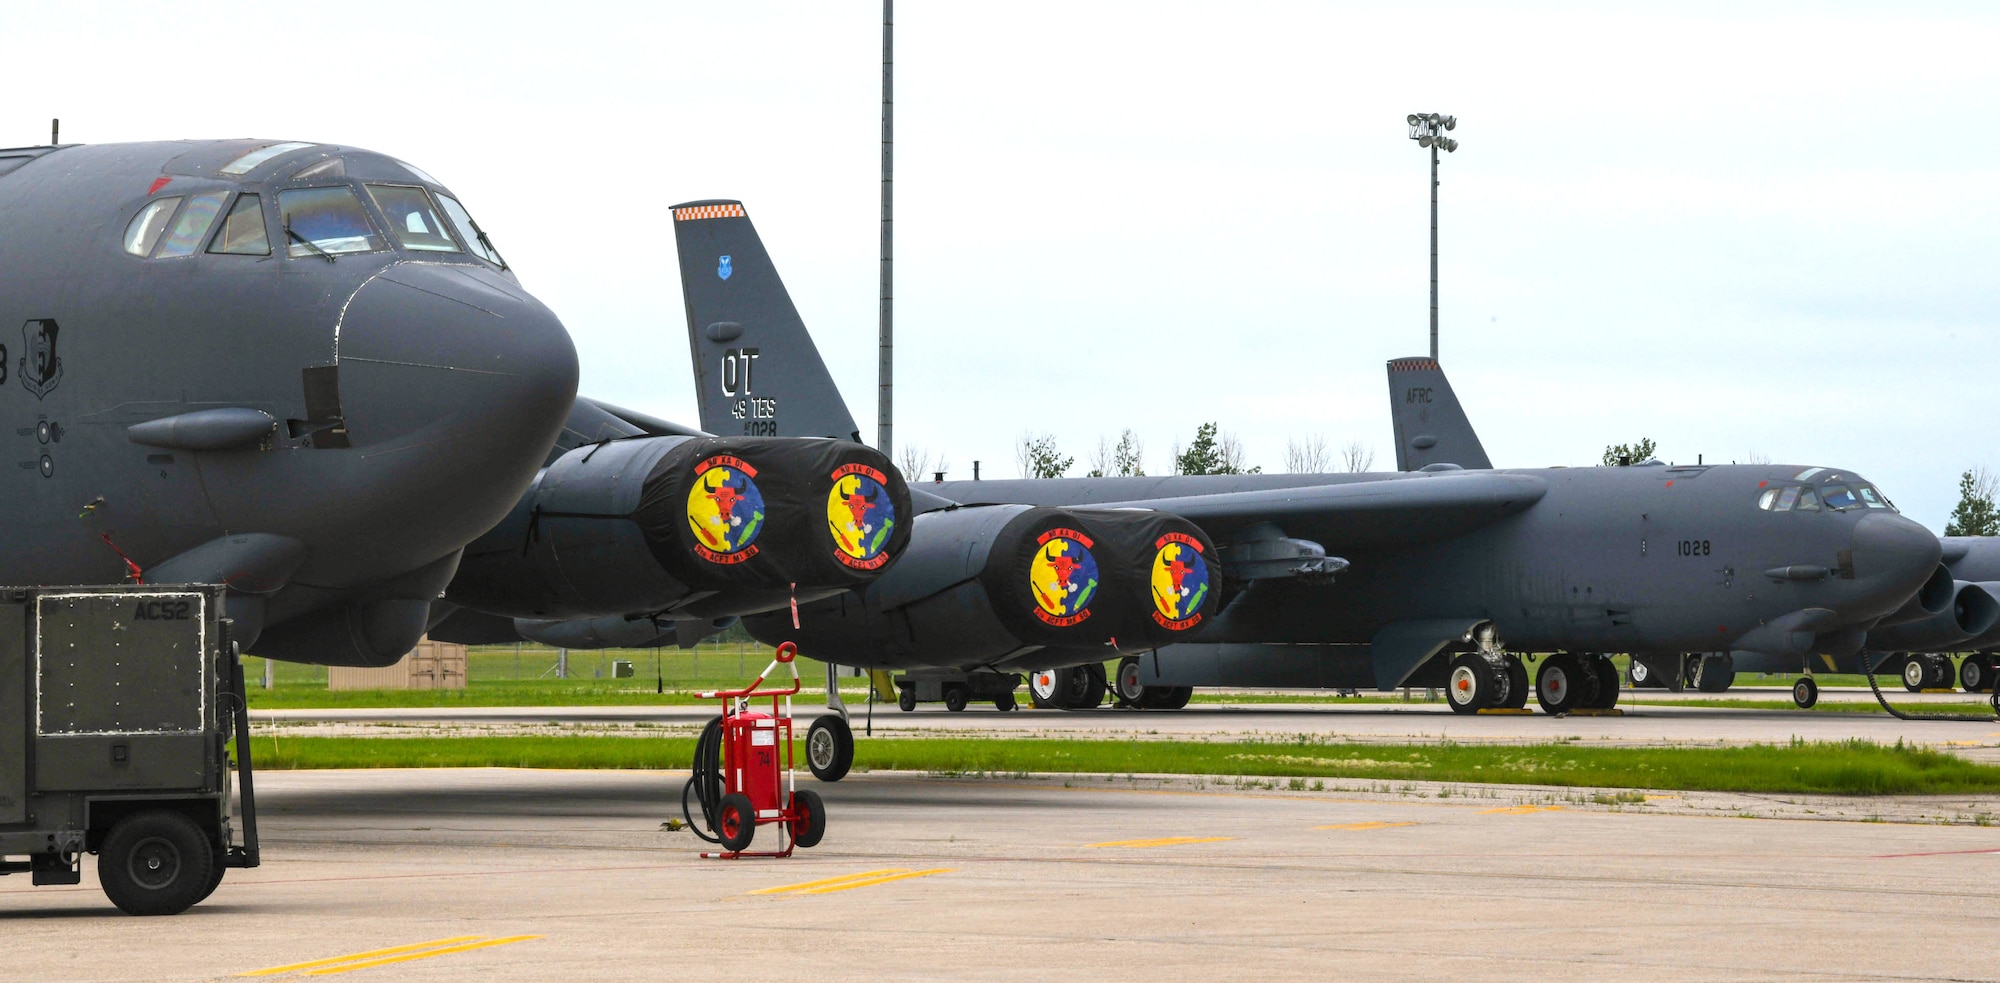 A B-52H Stratofortress assigned to the 69th Bomb Squadron is pictured alongside another B-52 assigned to the 49th Test and Evaluation Squadron on July 7, 2022. Both bombers participated in the B-52 Minot Roadshow event where the 49th TES, 340th Weapons Squadron, 69th BS, and 23rd BS executed combined sorties allowing for close collaboration and validation of Tactics, Techniques, and Procedures previously developed by the TES and WPS through integrated flight test. (U.S. Air Force photo by Airman 1st Class Alexander Nottingham)